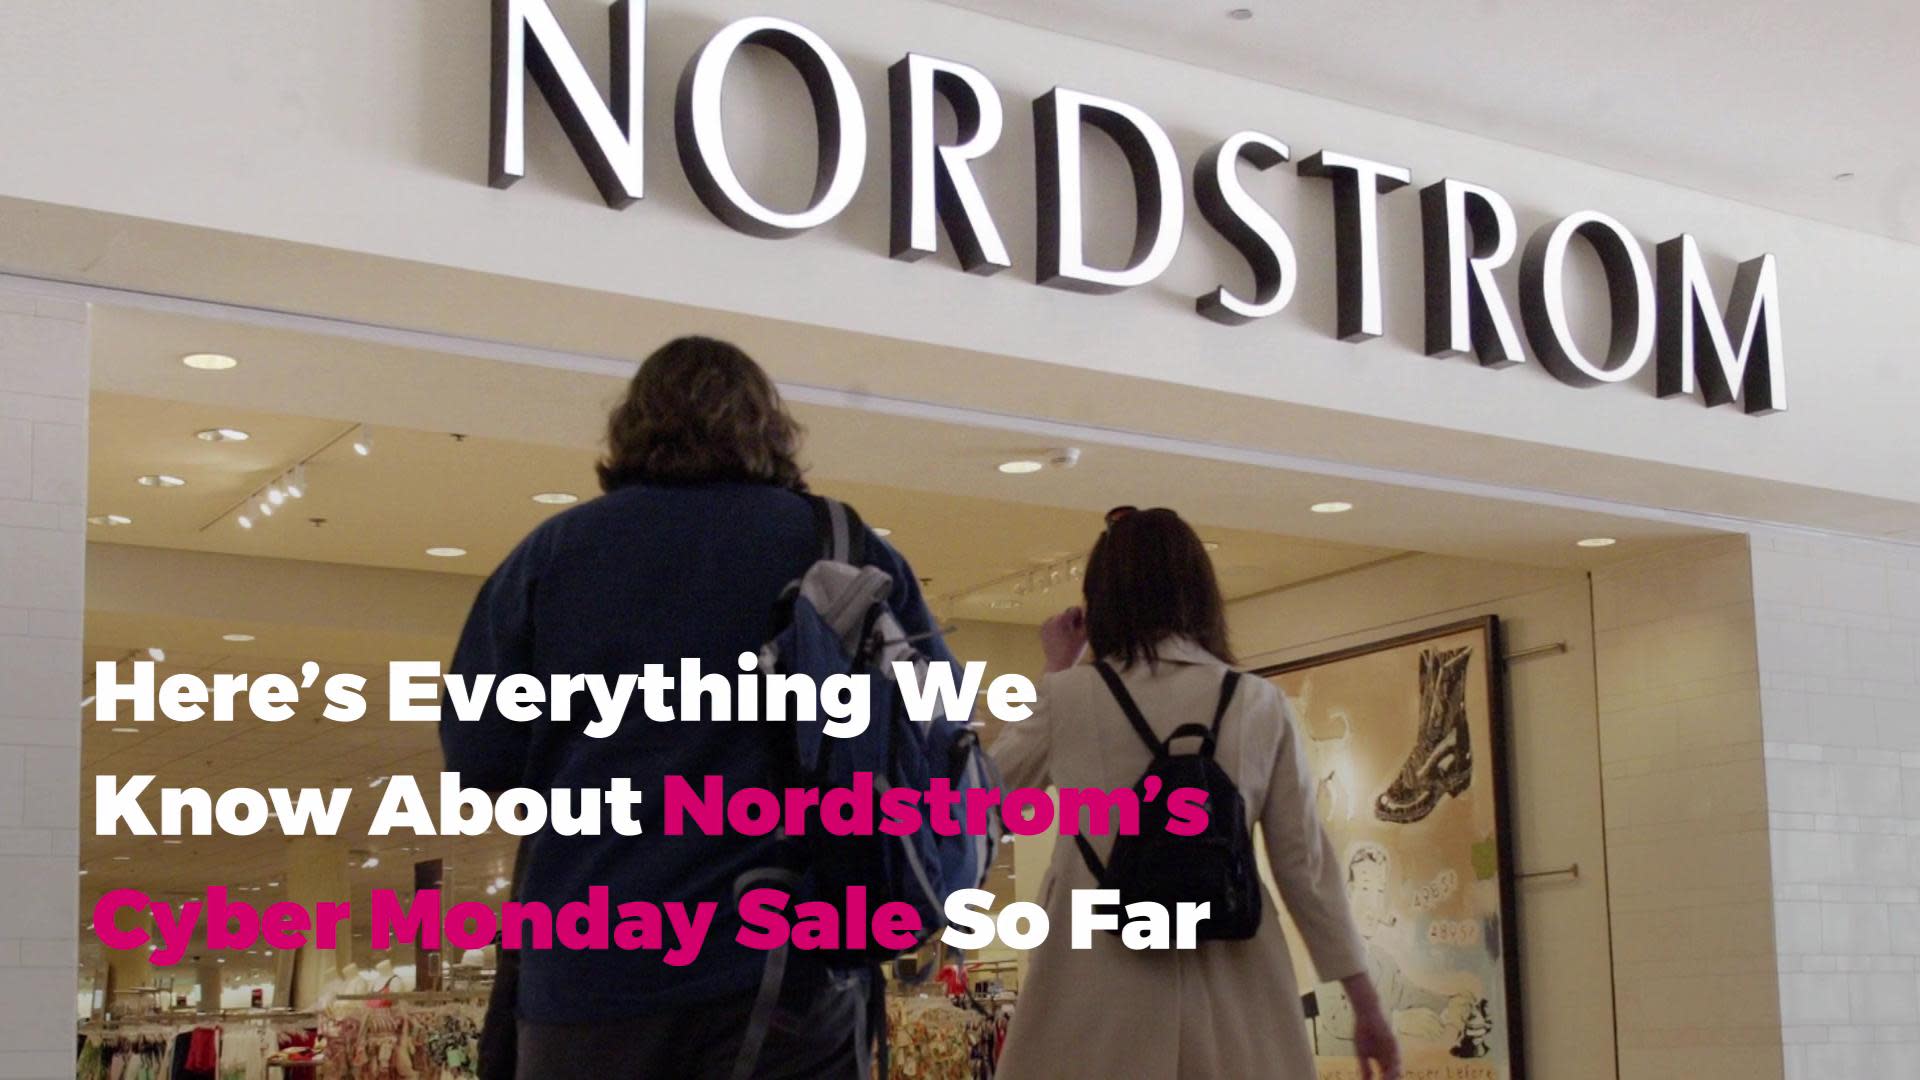 Here’s Everything We Know About Nordstrom’s Cyber Monday Sale So Far